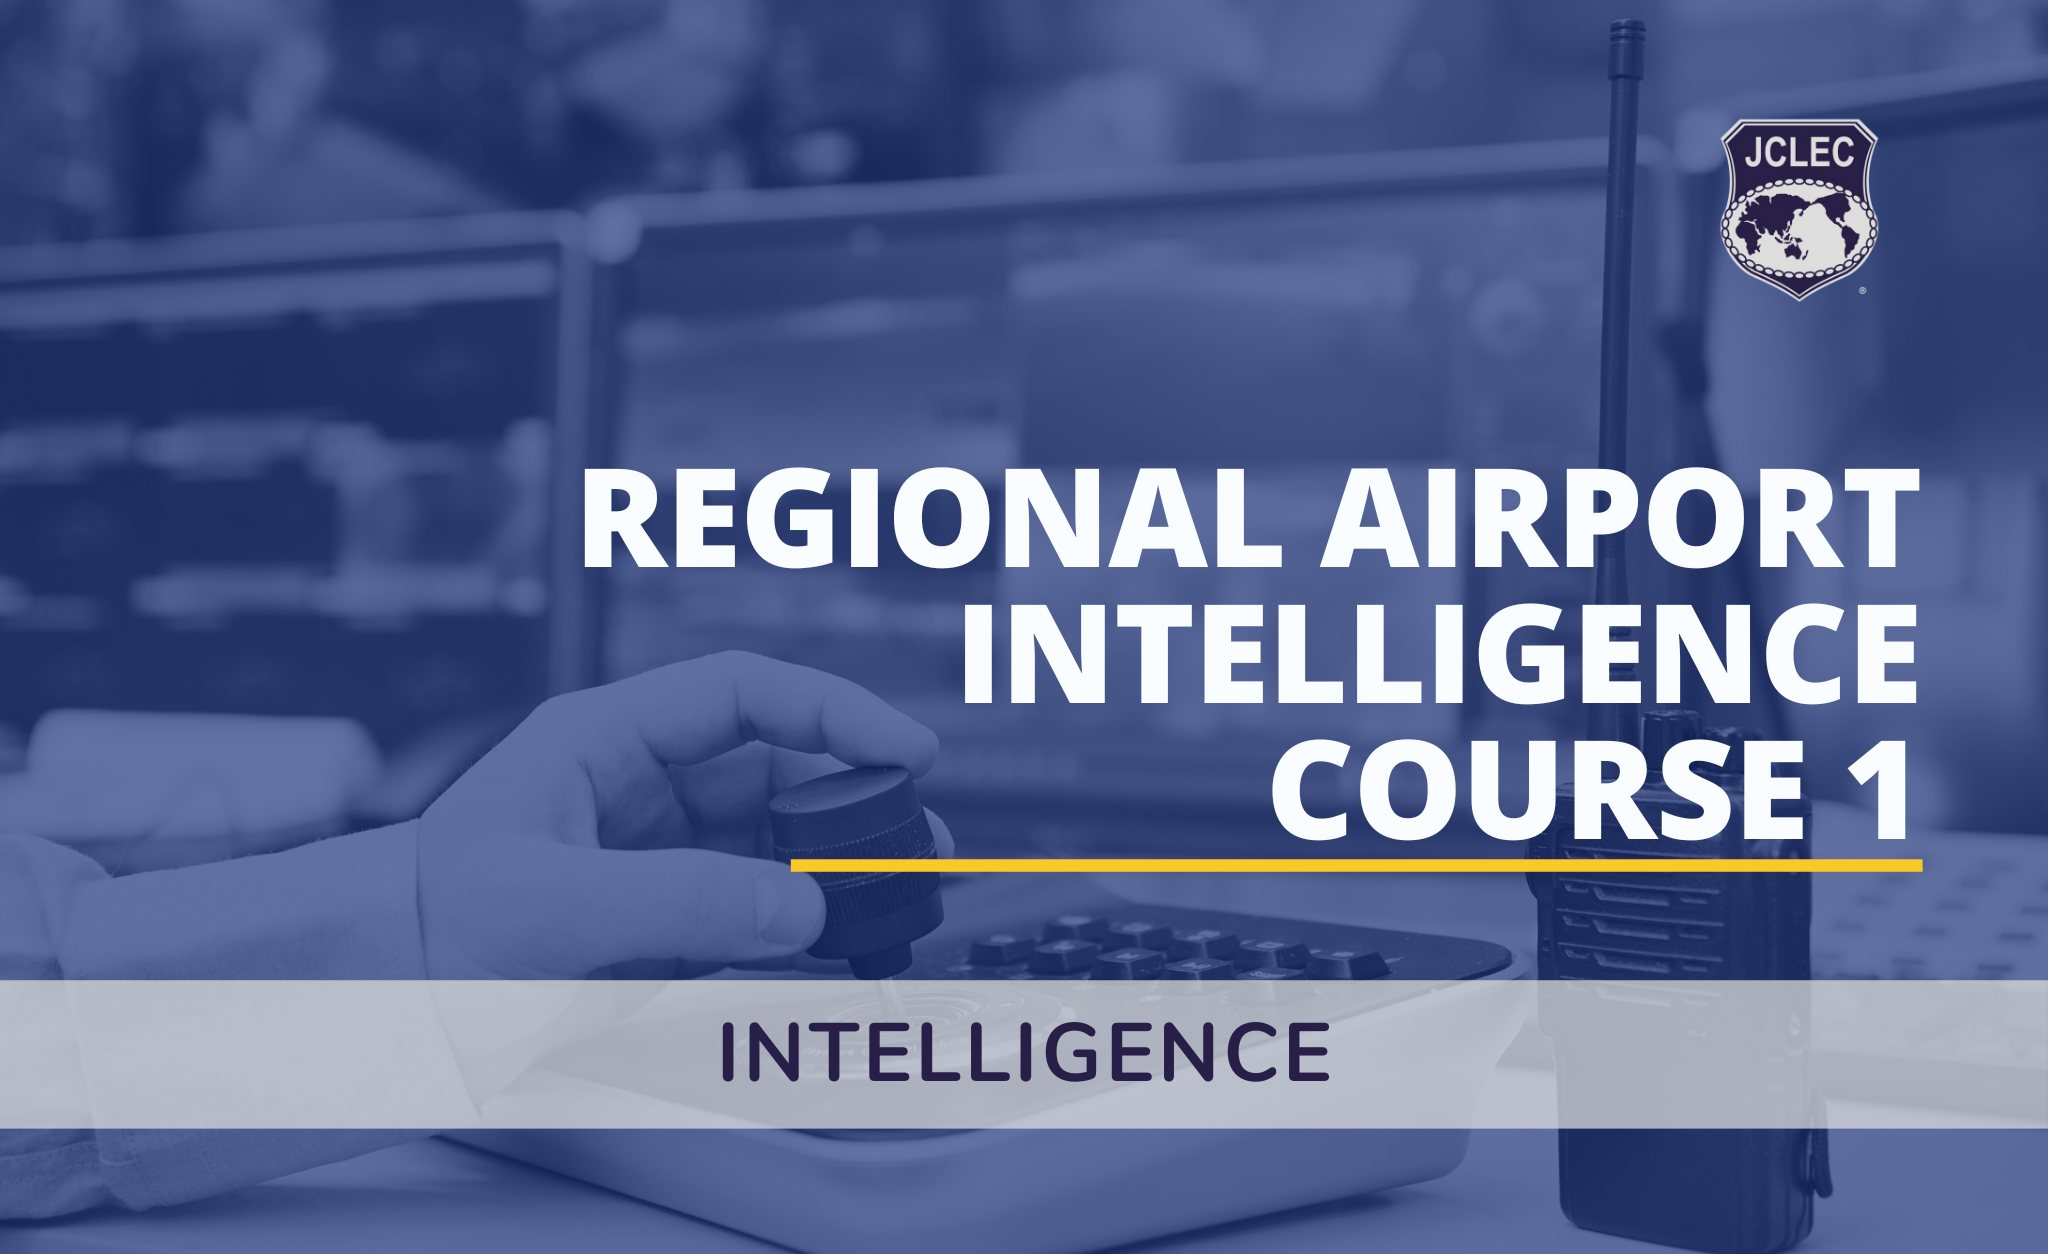 Regional Airport Intelligence Course 1